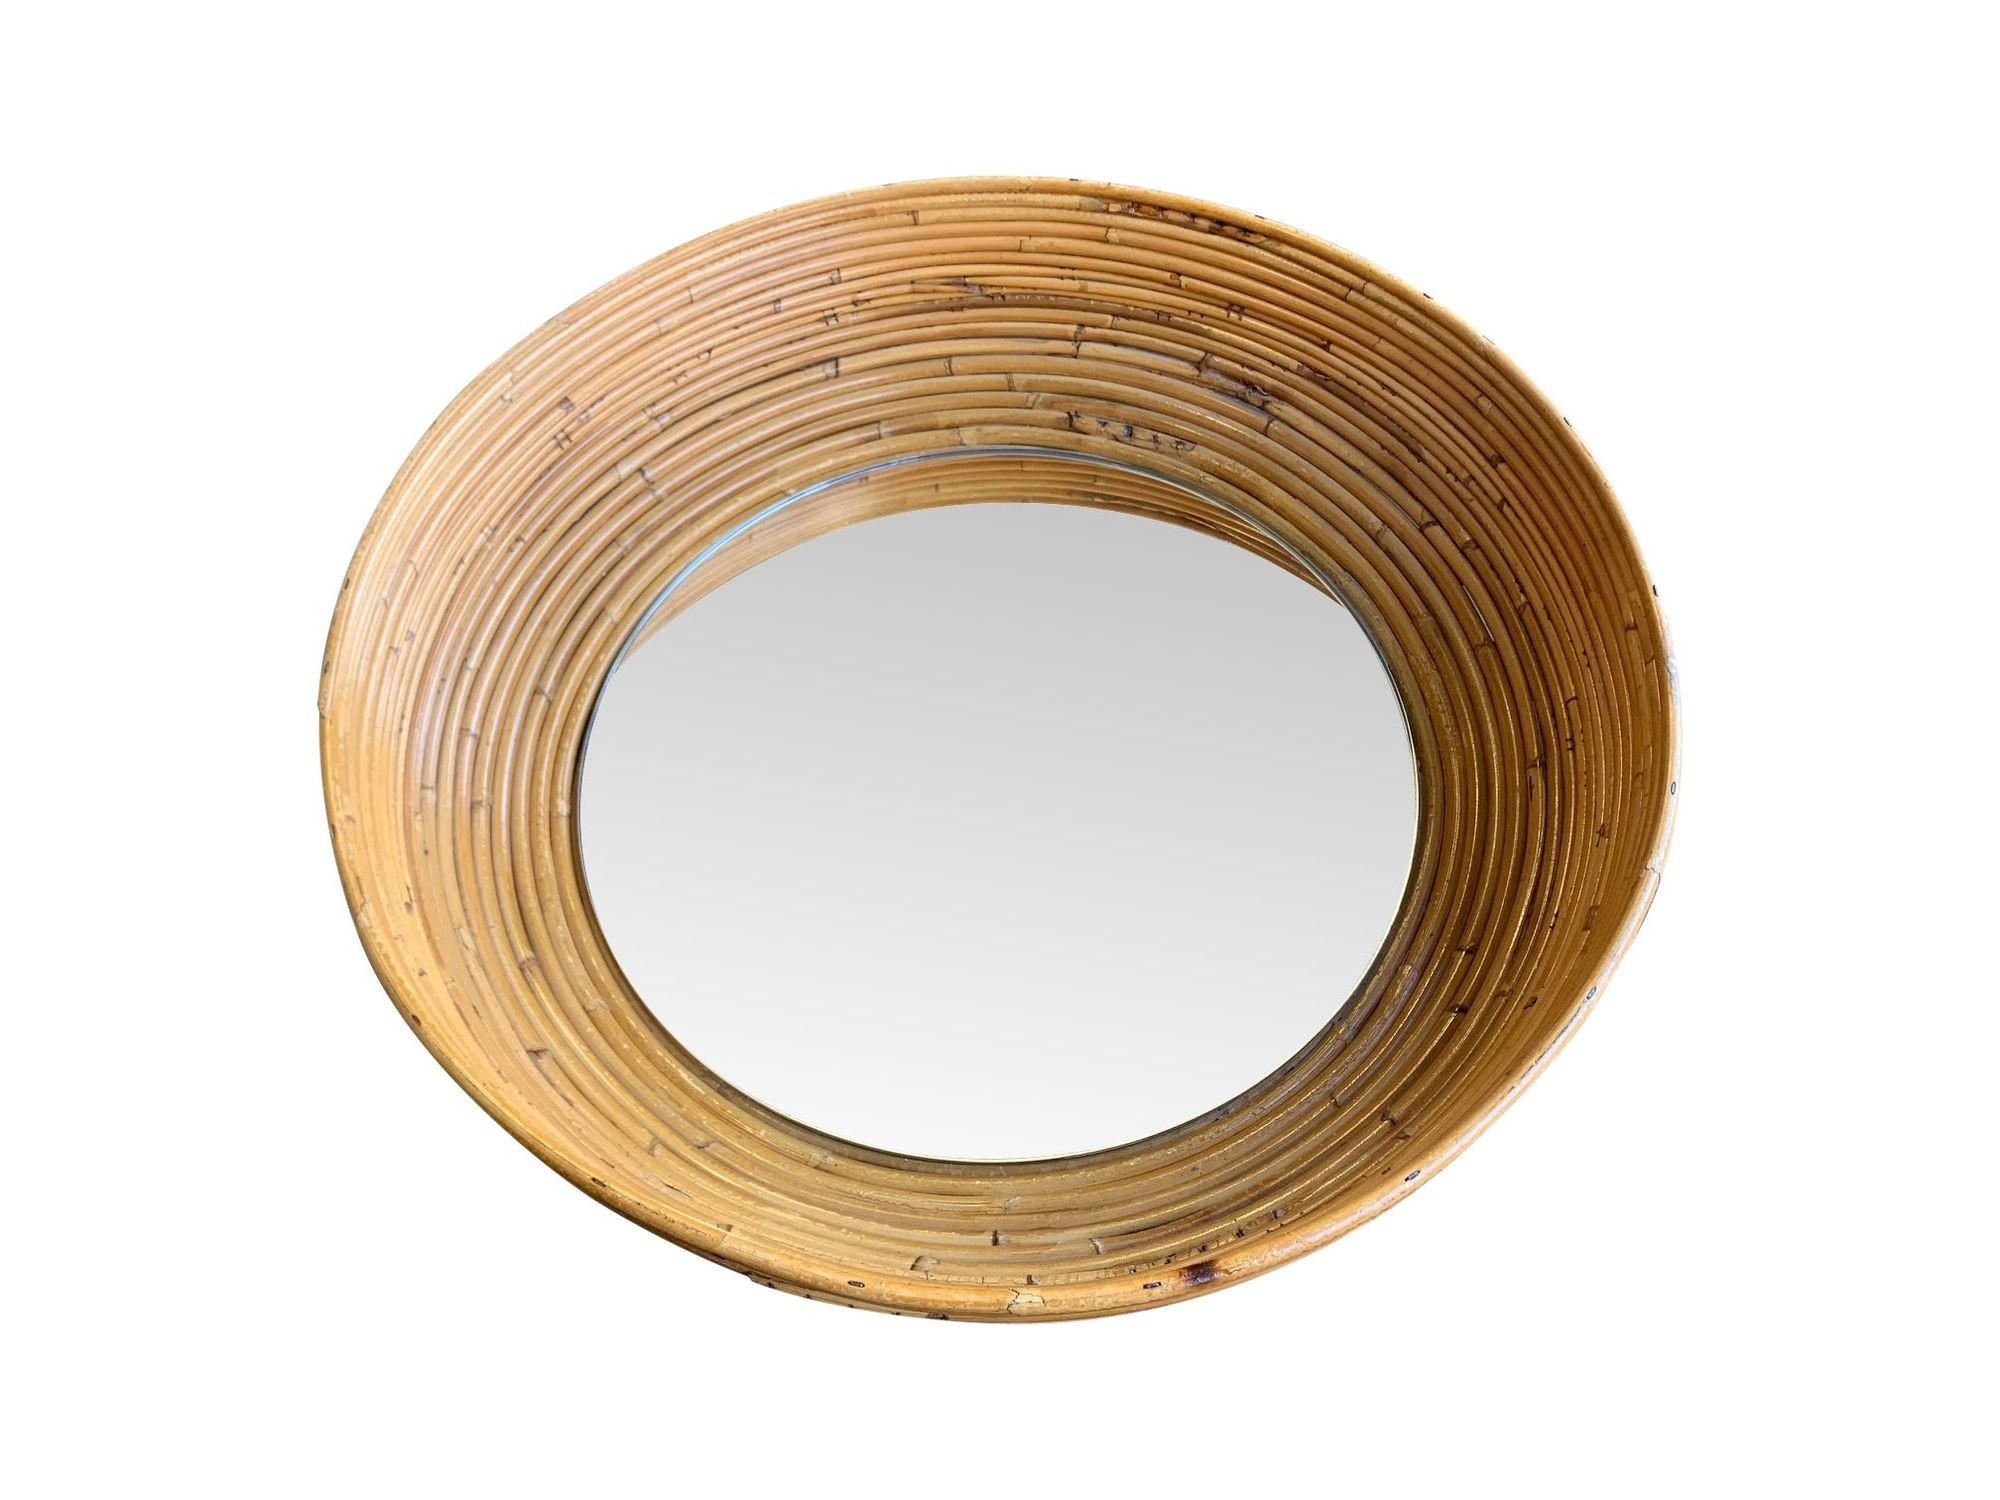 1960s French Riviera Circular Bowl Shaped Bamboo Mirror For Sale 3